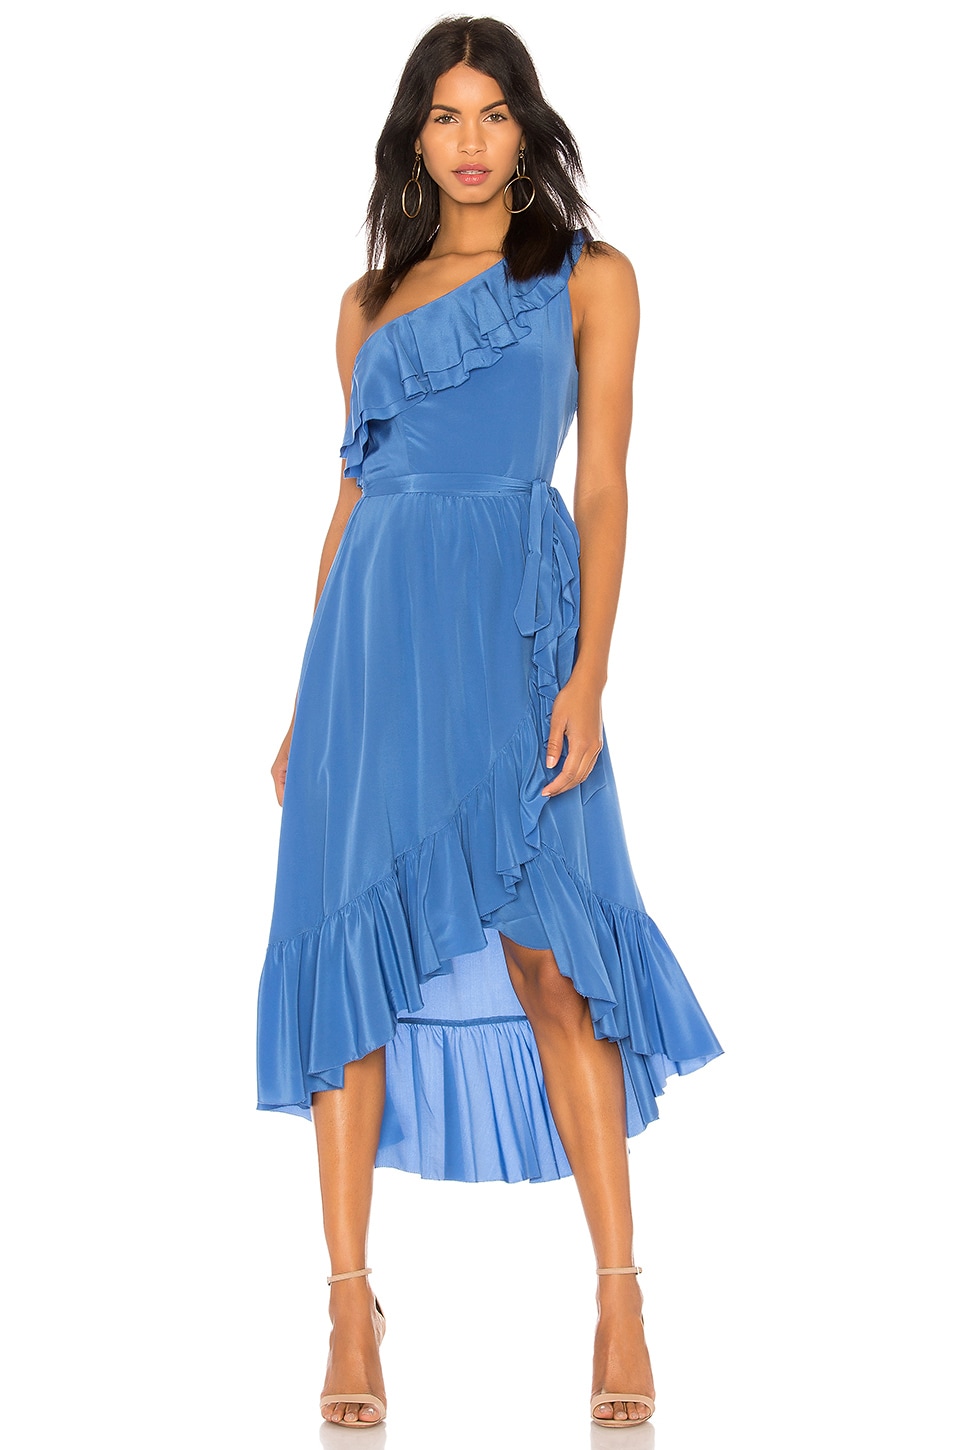 JOIE JOIE DAMICA DRESS IN ROYAL.,JOIE-WD495